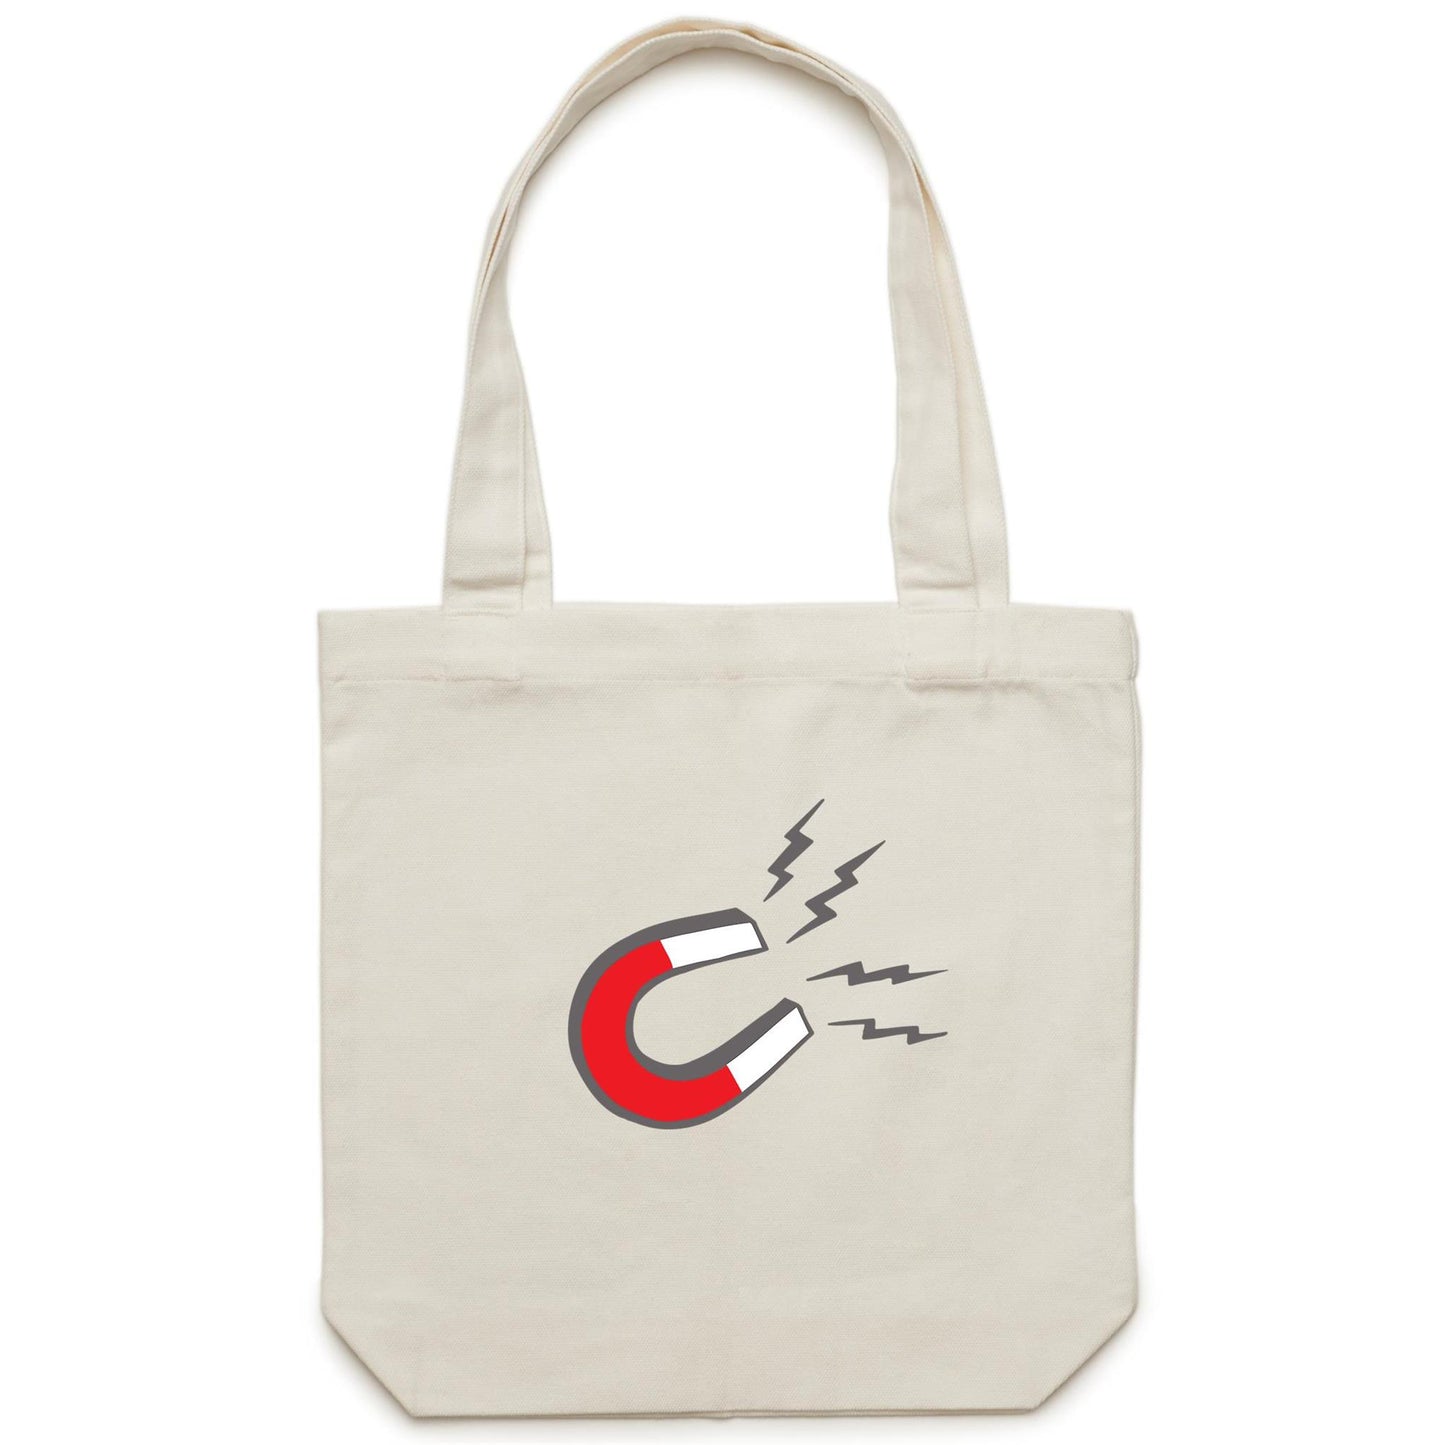 Magnet Canvas Totes